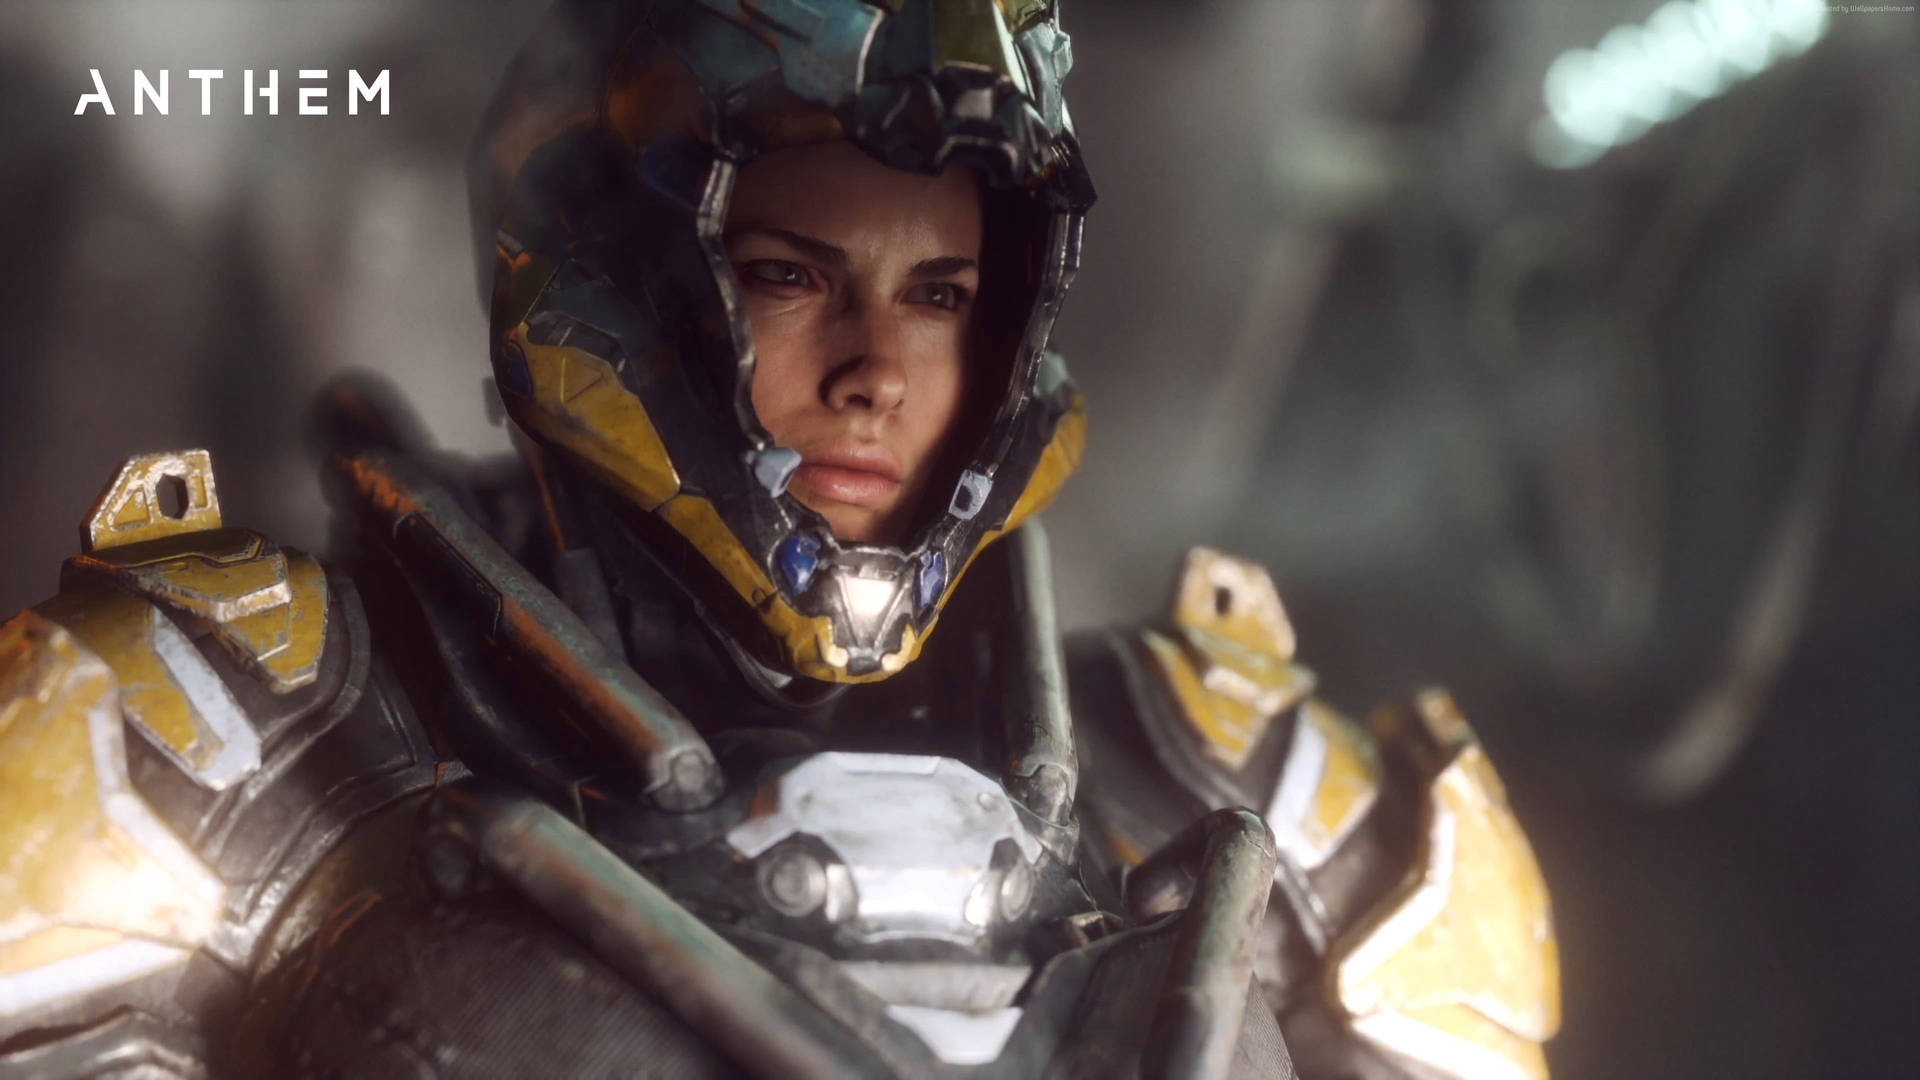 Join the Freelancers on their path towards discovery in Anthem Wallpaper